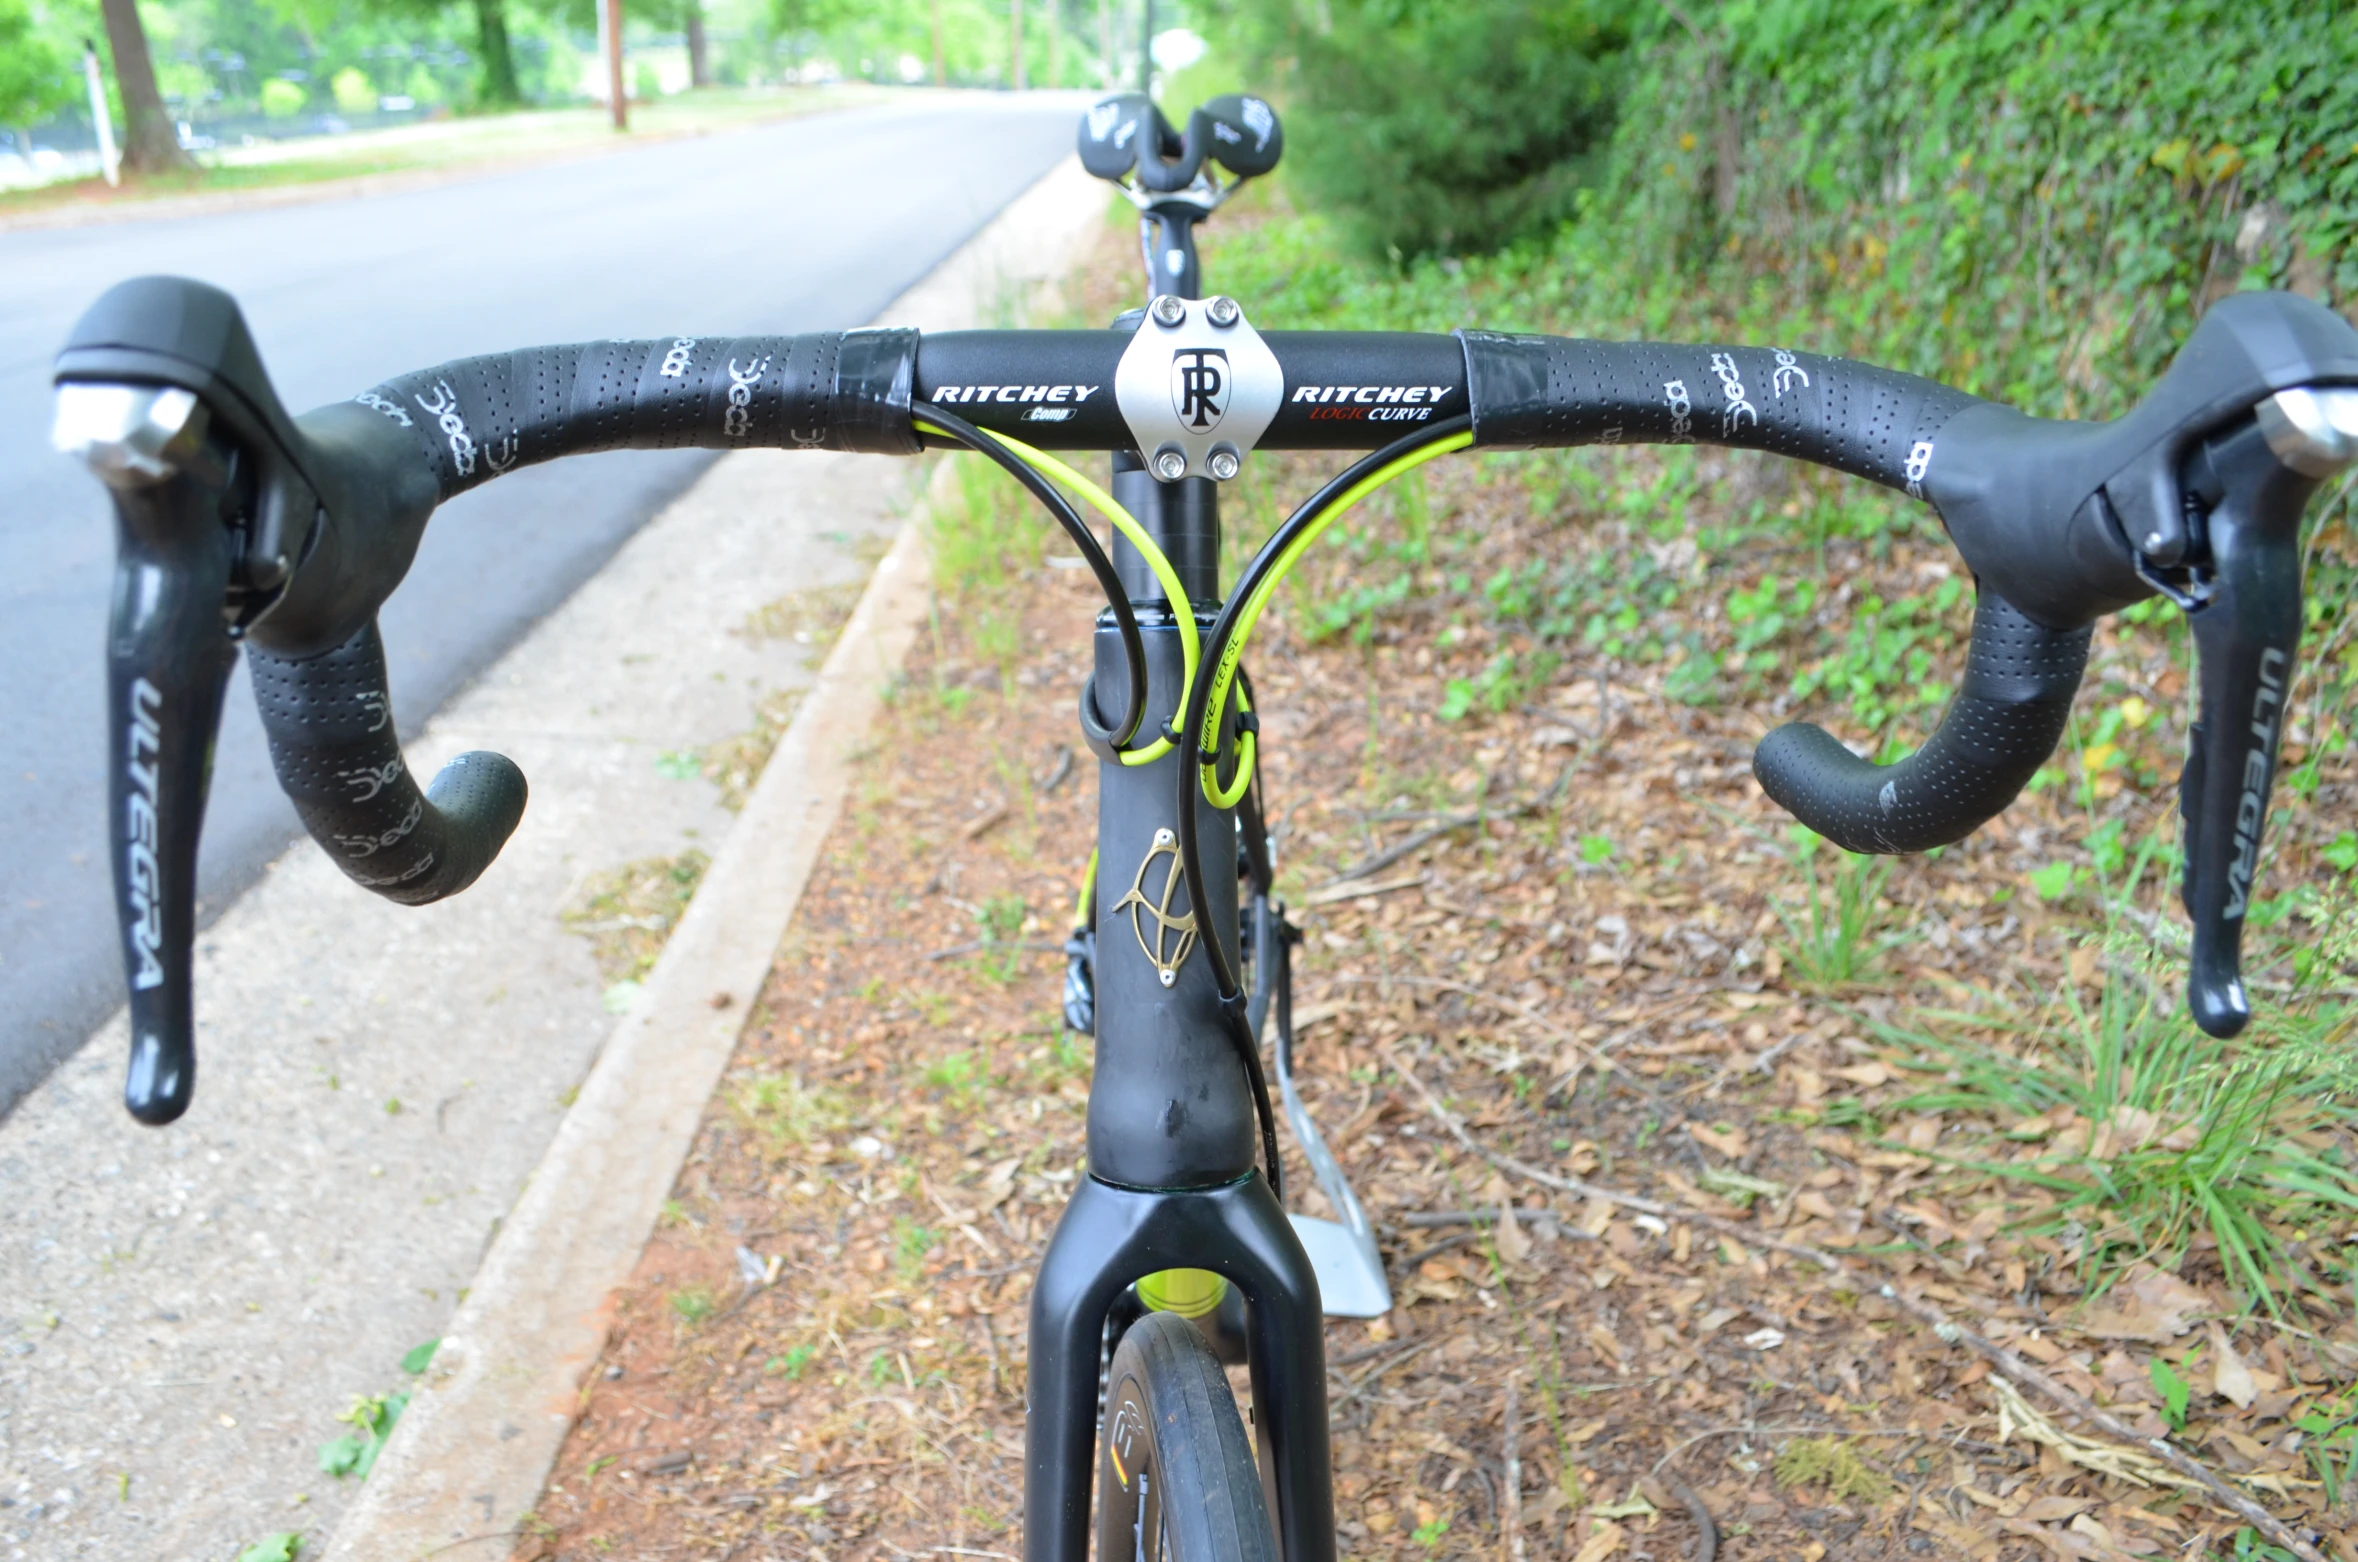 the top part of the bike showing the handles